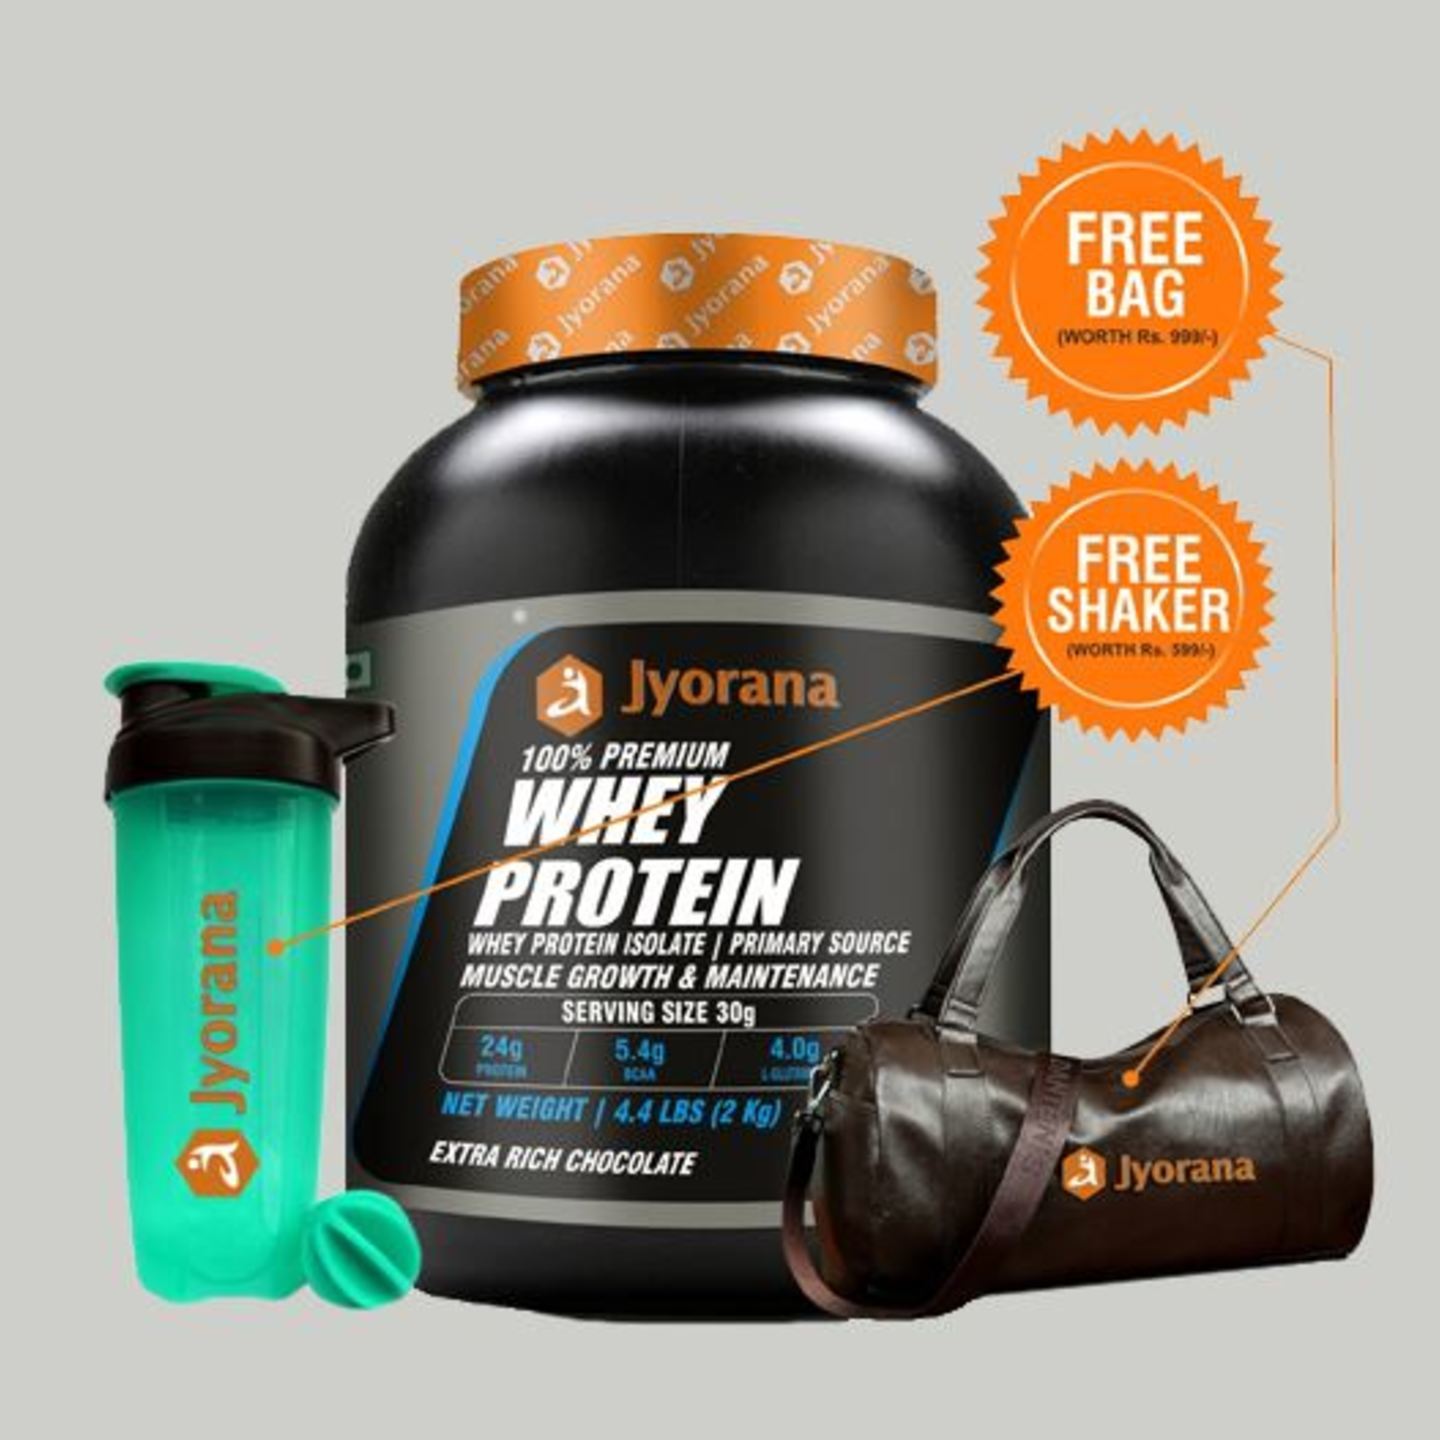 WellnessMart Jyorana 100 Whey protein with Isolate with Free Sports Bag and Shaker Bottle - 2 Kg